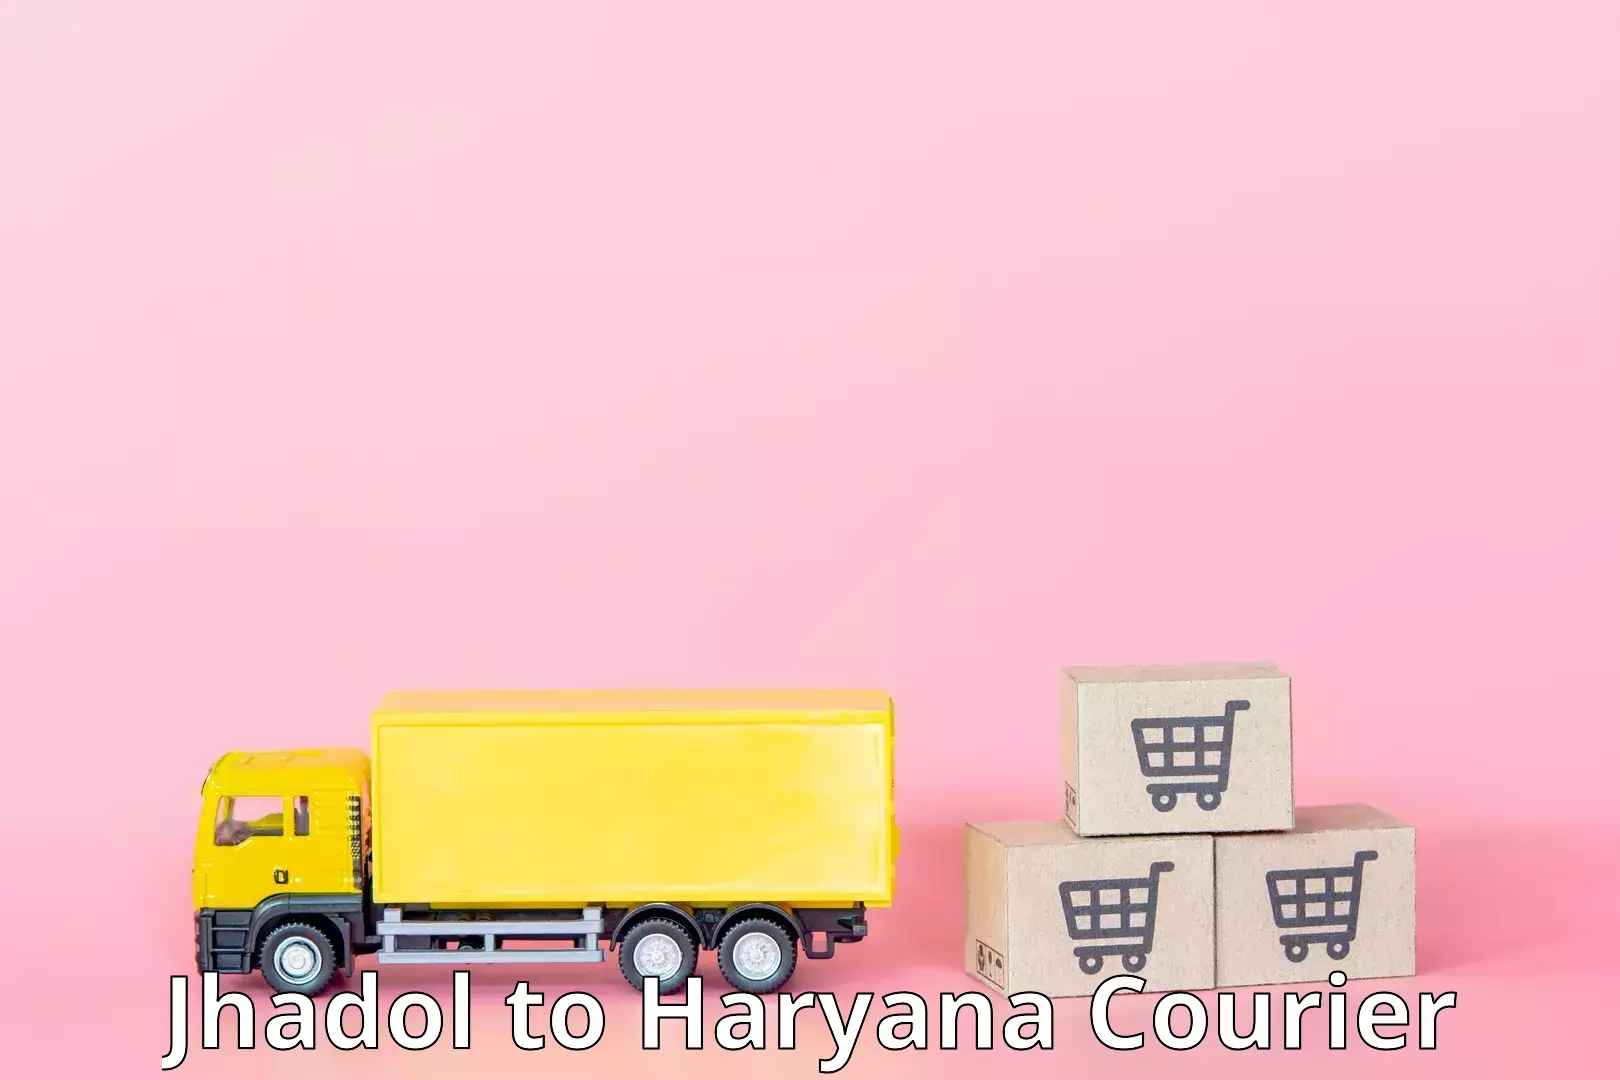 Efficient order fulfillment Jhadol to Panipat